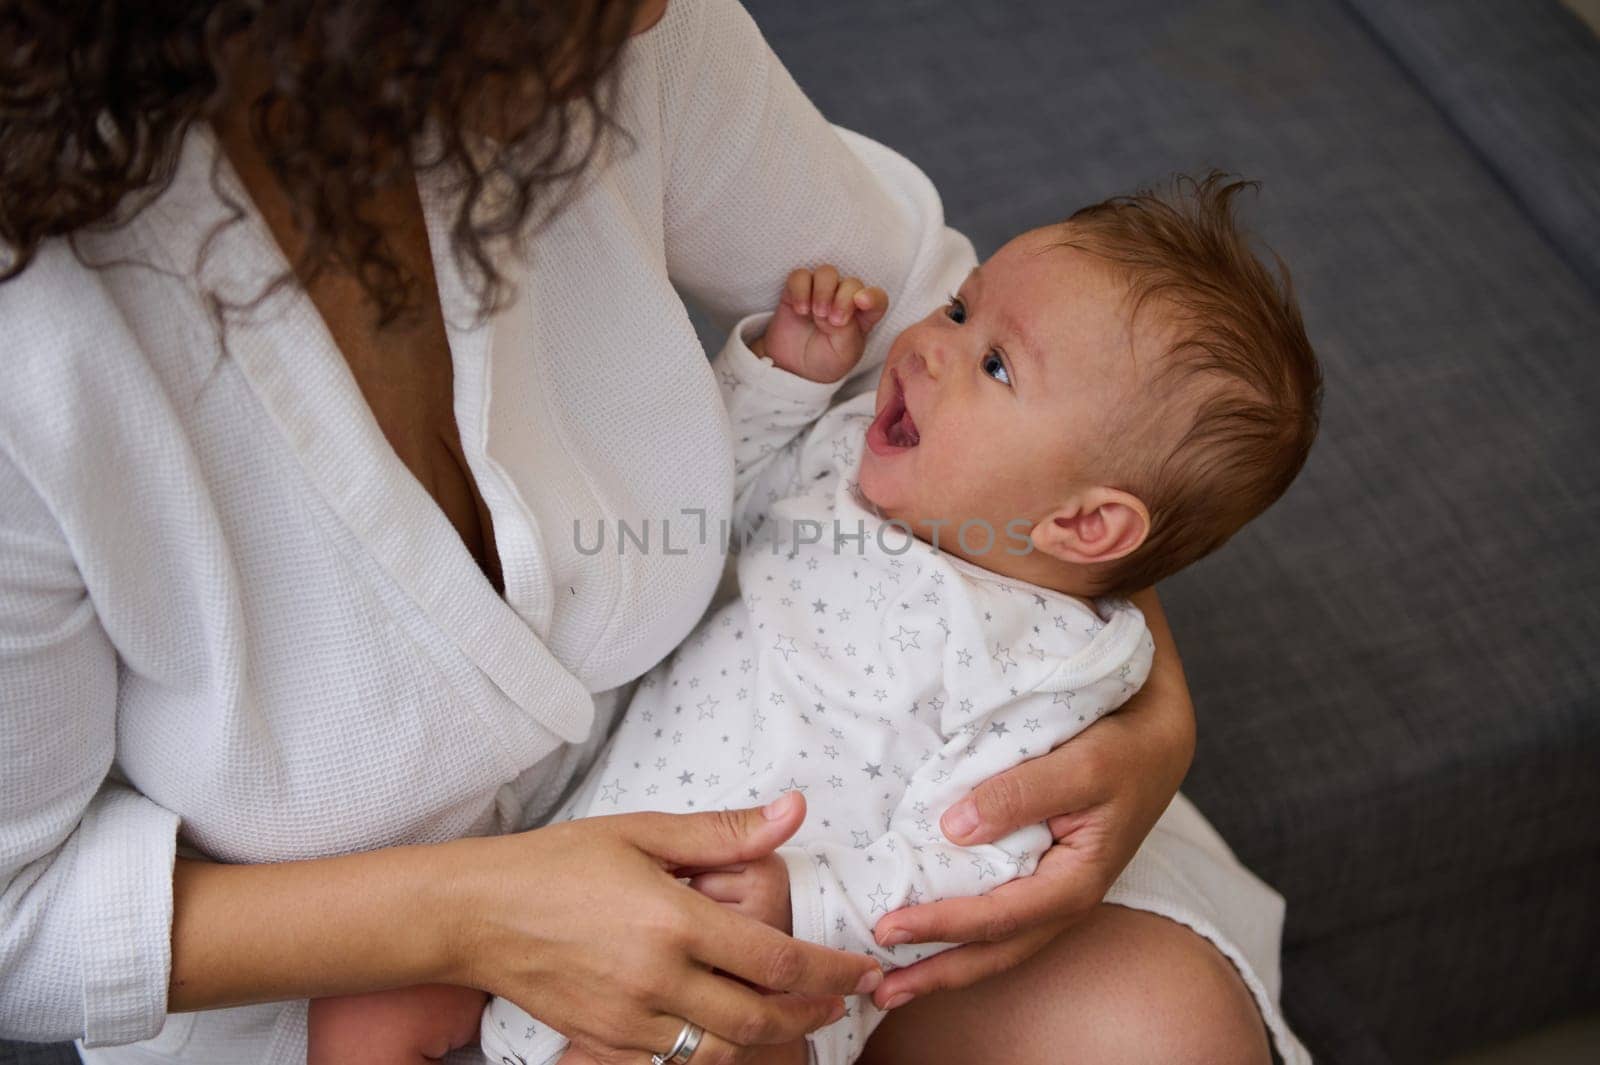 Close-up portrait of a cute baby boy smiling in the hands of his loving caring mother. Loving young mom holds her lovely baby boy, close in moment filled with tenderness with affection creating memory